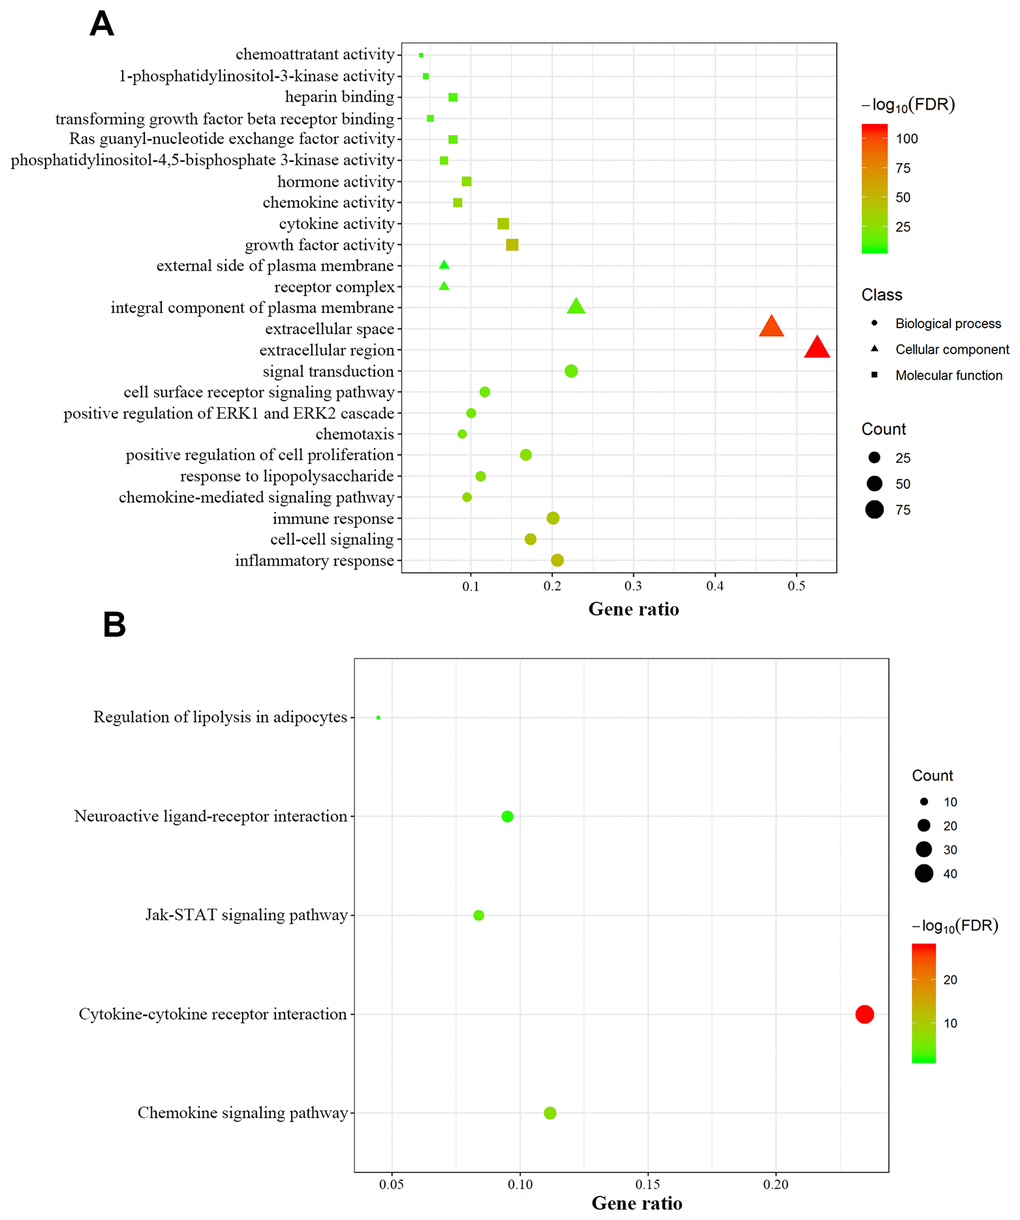 Functional annotation of differentially expressed immunity-related genes. (A) Enriched Gene Ontology terms including biological process (dots), cellular component (triangles) and molecular function (squares). (B) Enriched KEGG pathways.